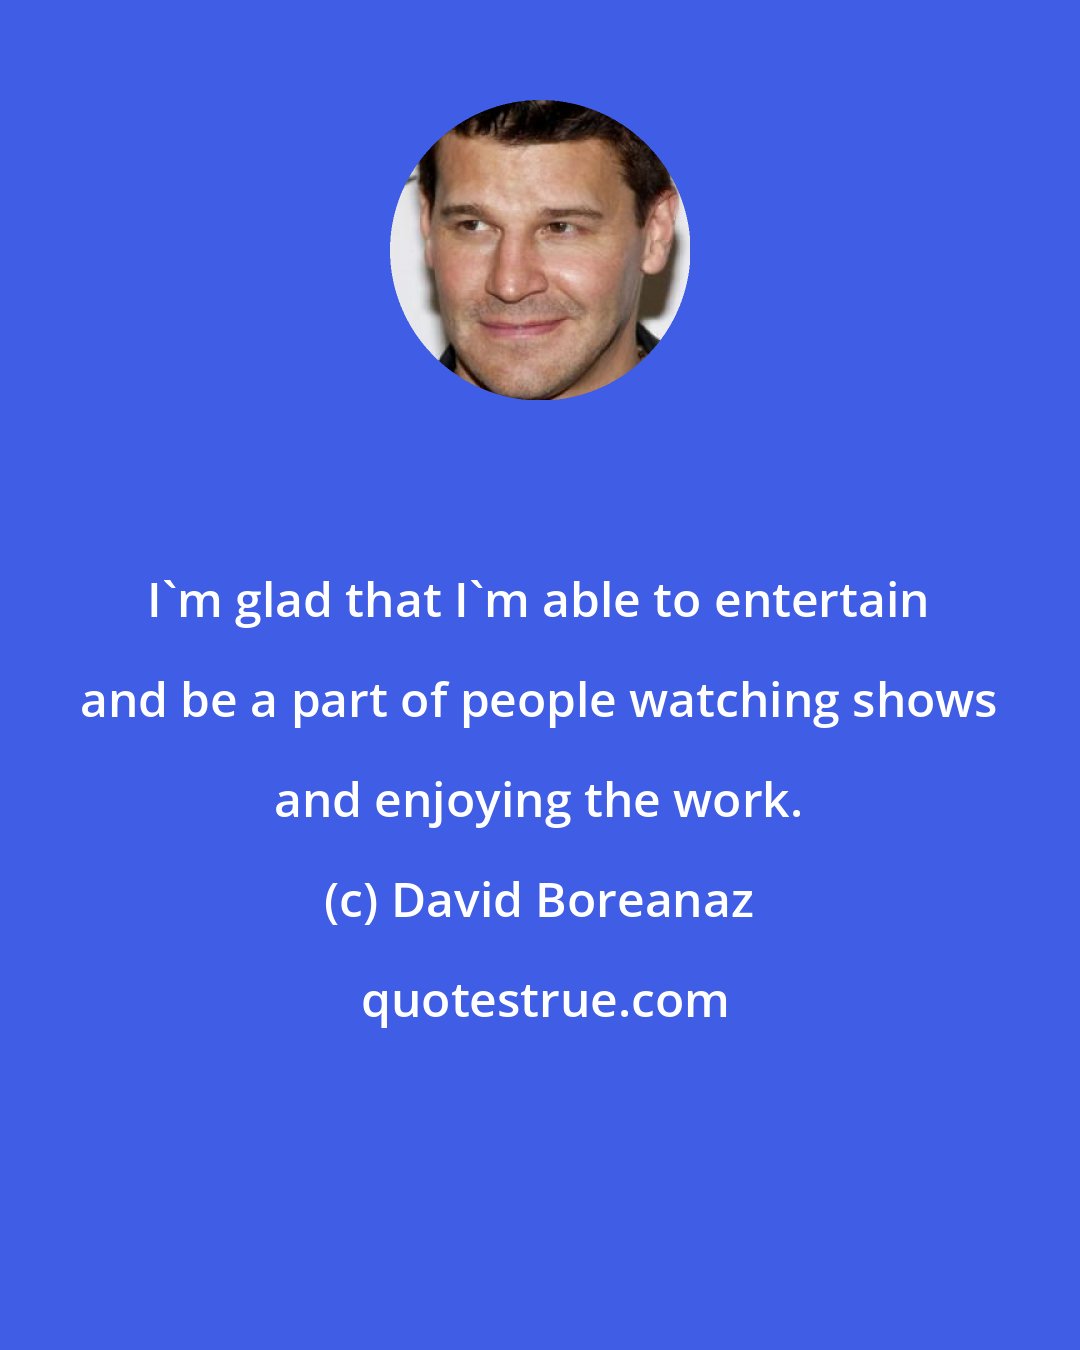 David Boreanaz: I'm glad that I'm able to entertain and be a part of people watching shows and enjoying the work.